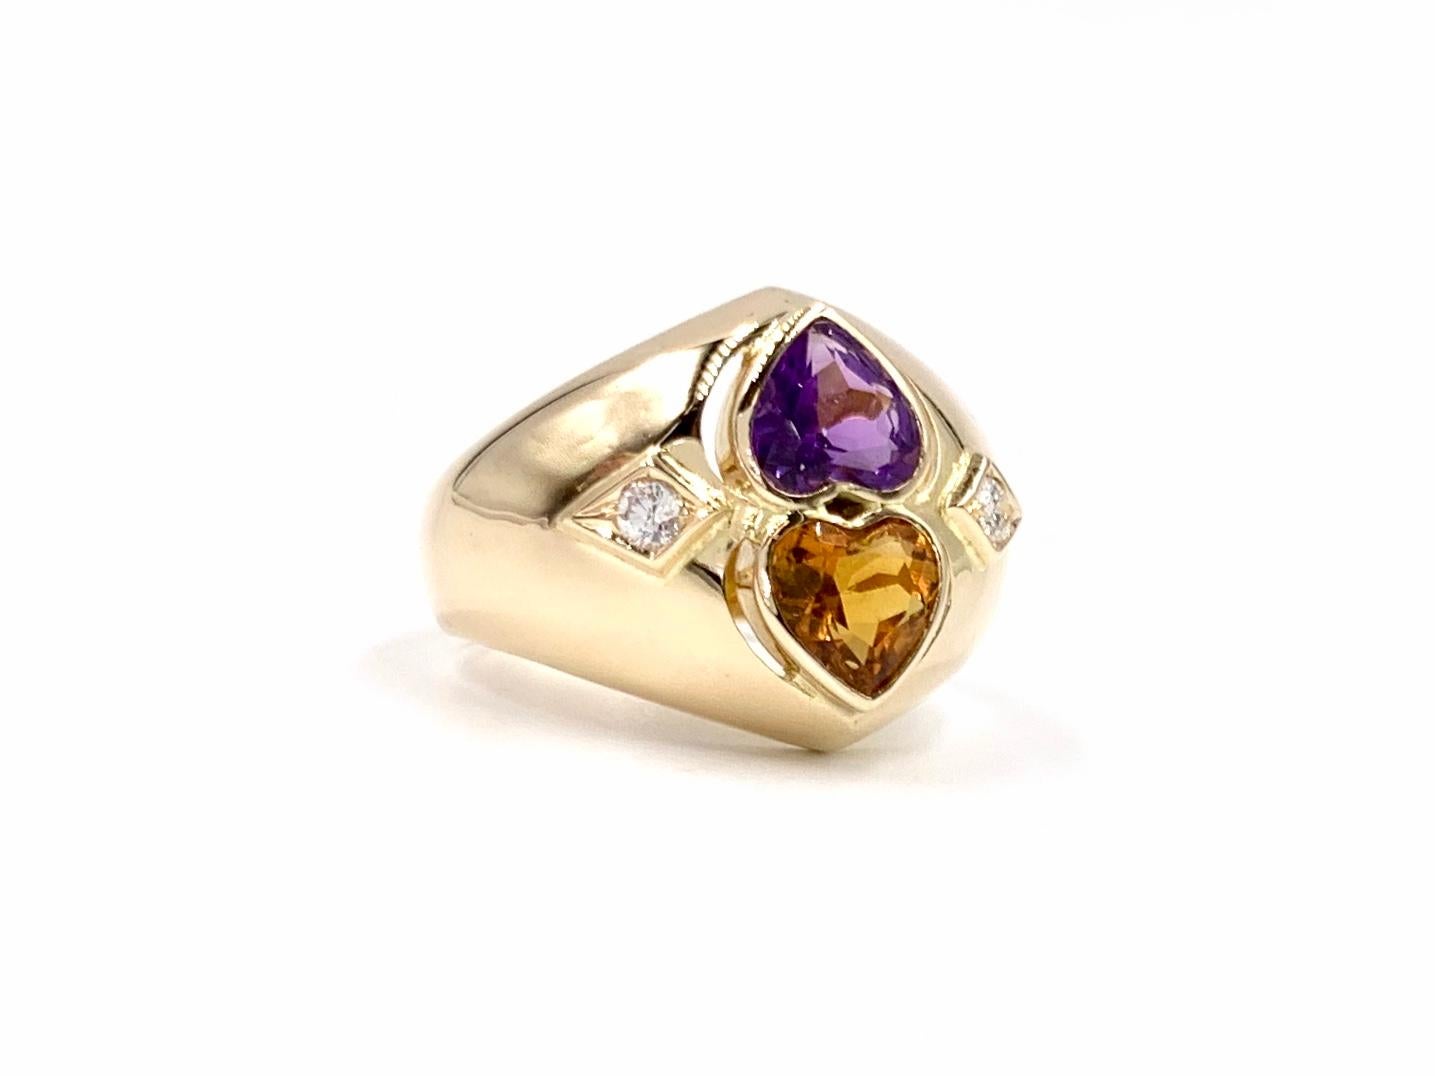 14 Karat yellow gold polished wide ring featuring vibrant heart shape citrine and amethyst gemstones and two round brilliant diamonds. Width of ring measures 17mm and tapers to 4mm under the finger. Diamond quality is approximately G color, VS2